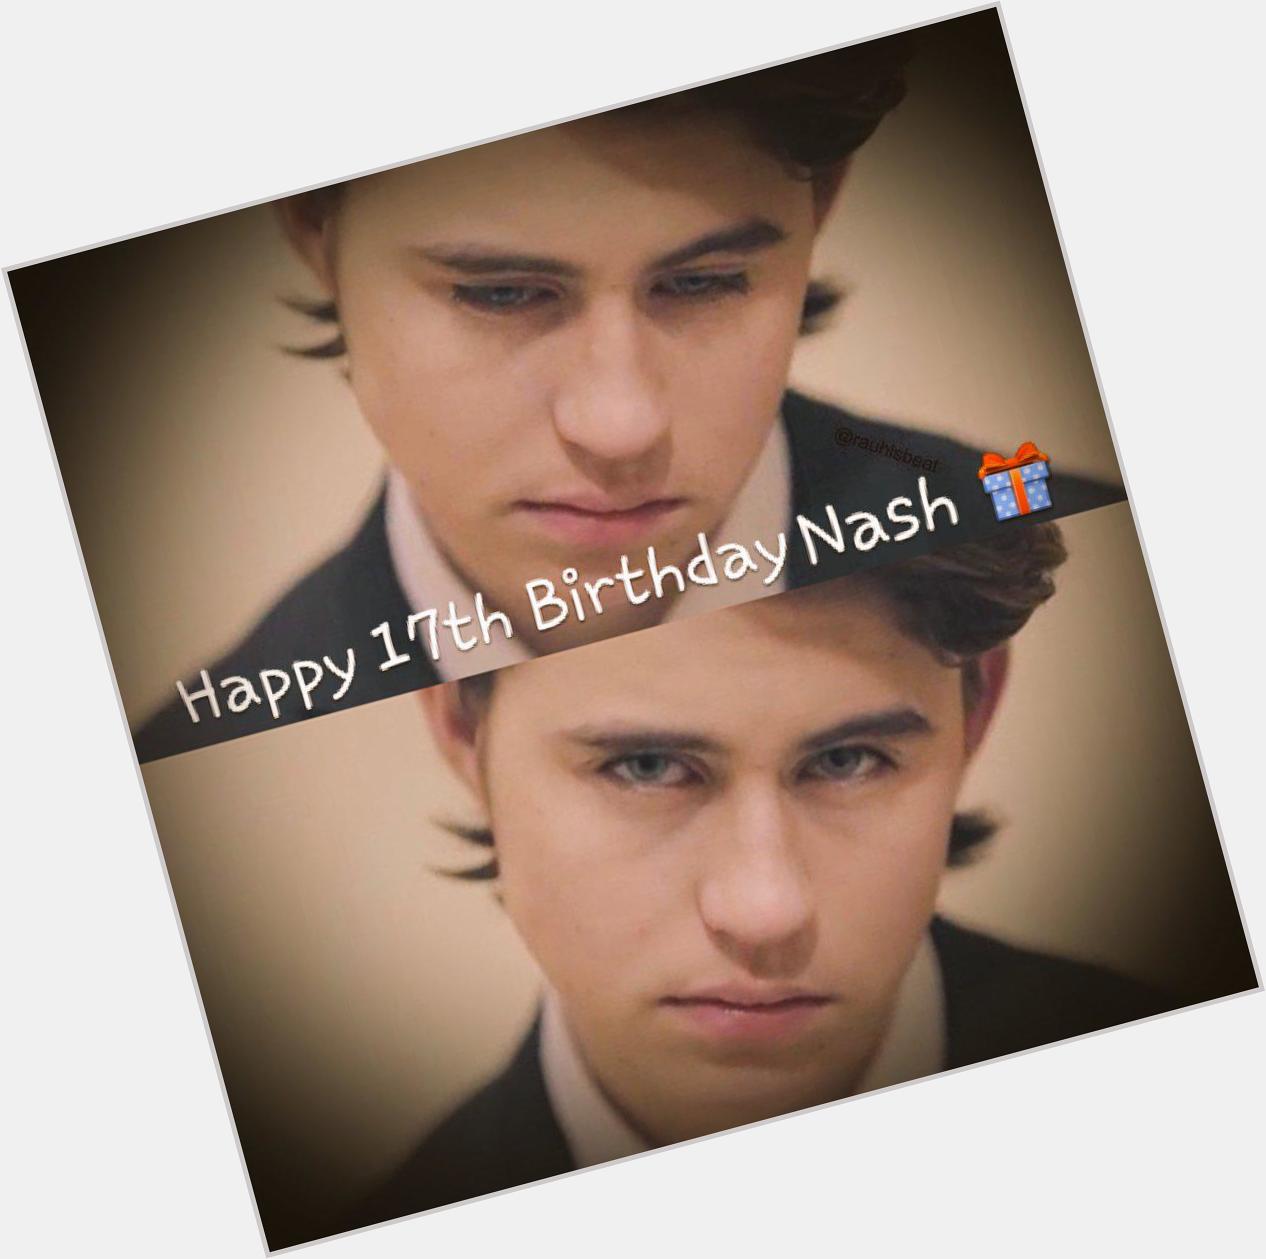 Happy Birthday Nash Grier I love you so much. Ur so funny and cute! I love watching ur YouTube videos & vines Ily 